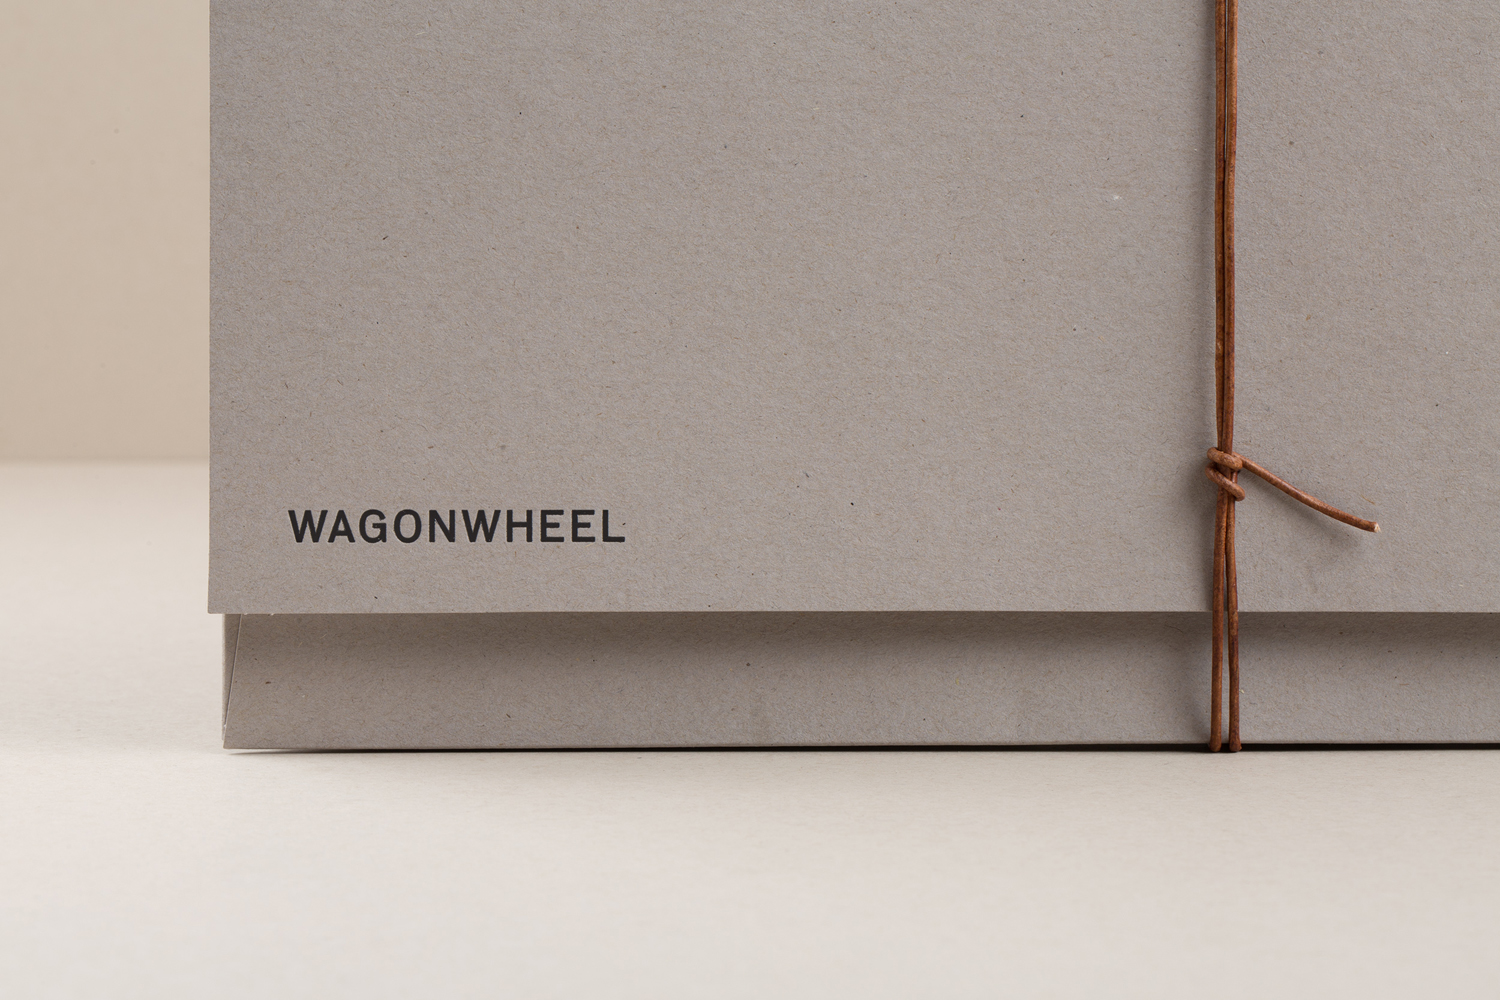 Brand identity and folder with black block foil print finish for Nashville-based boutique real estate title and escrow company Wagon Wheel designed by Perky Bros.